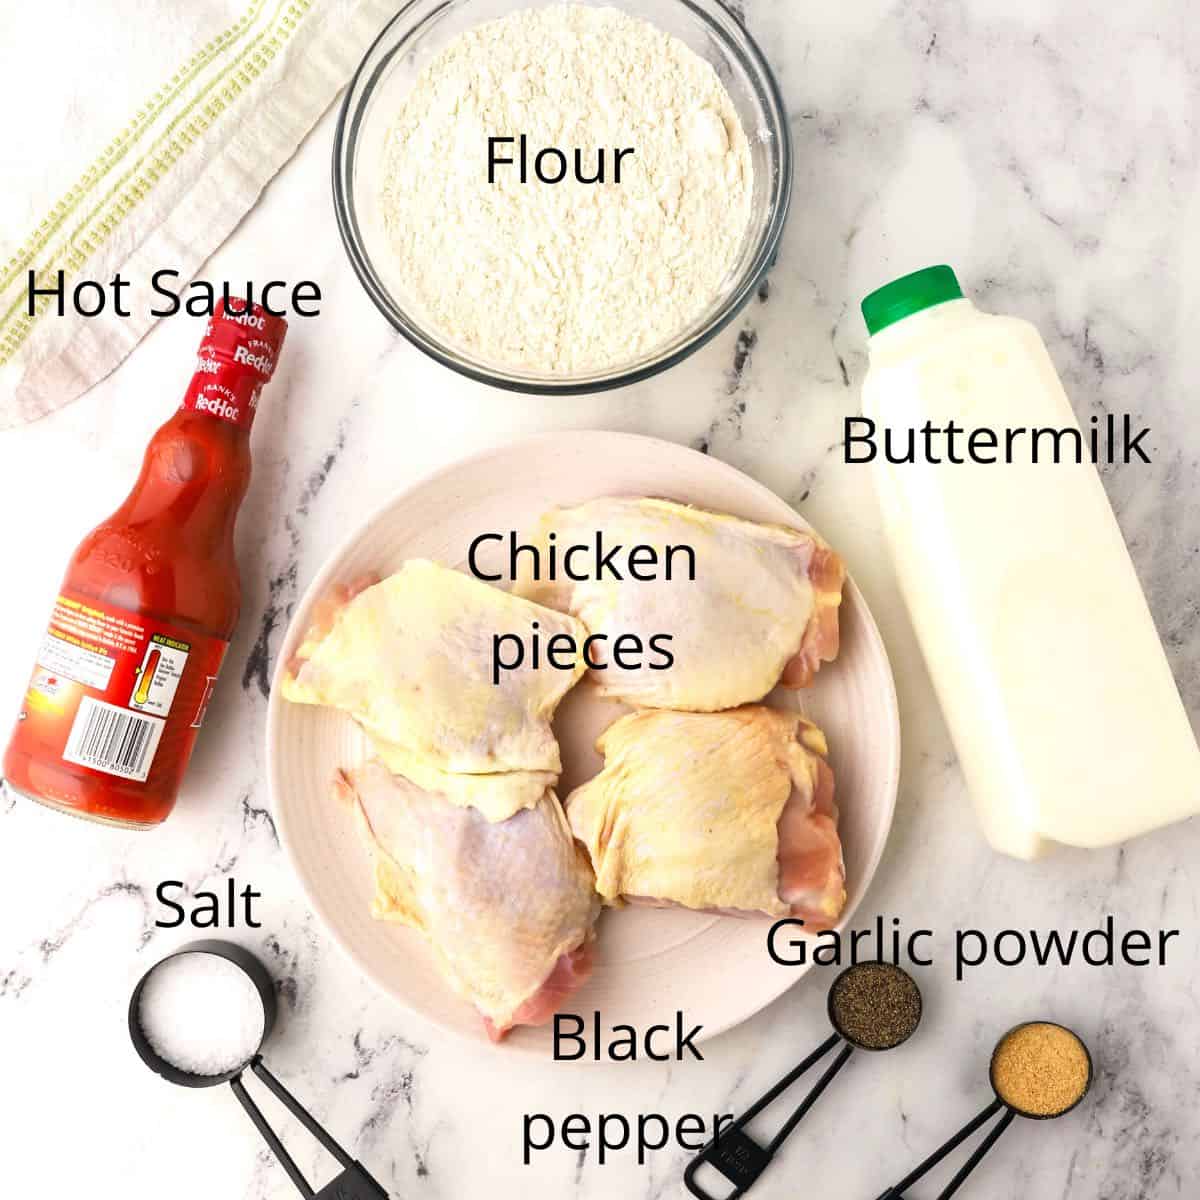 Ingredients for fried chicken including chicken thighs, buttermilk and flour.